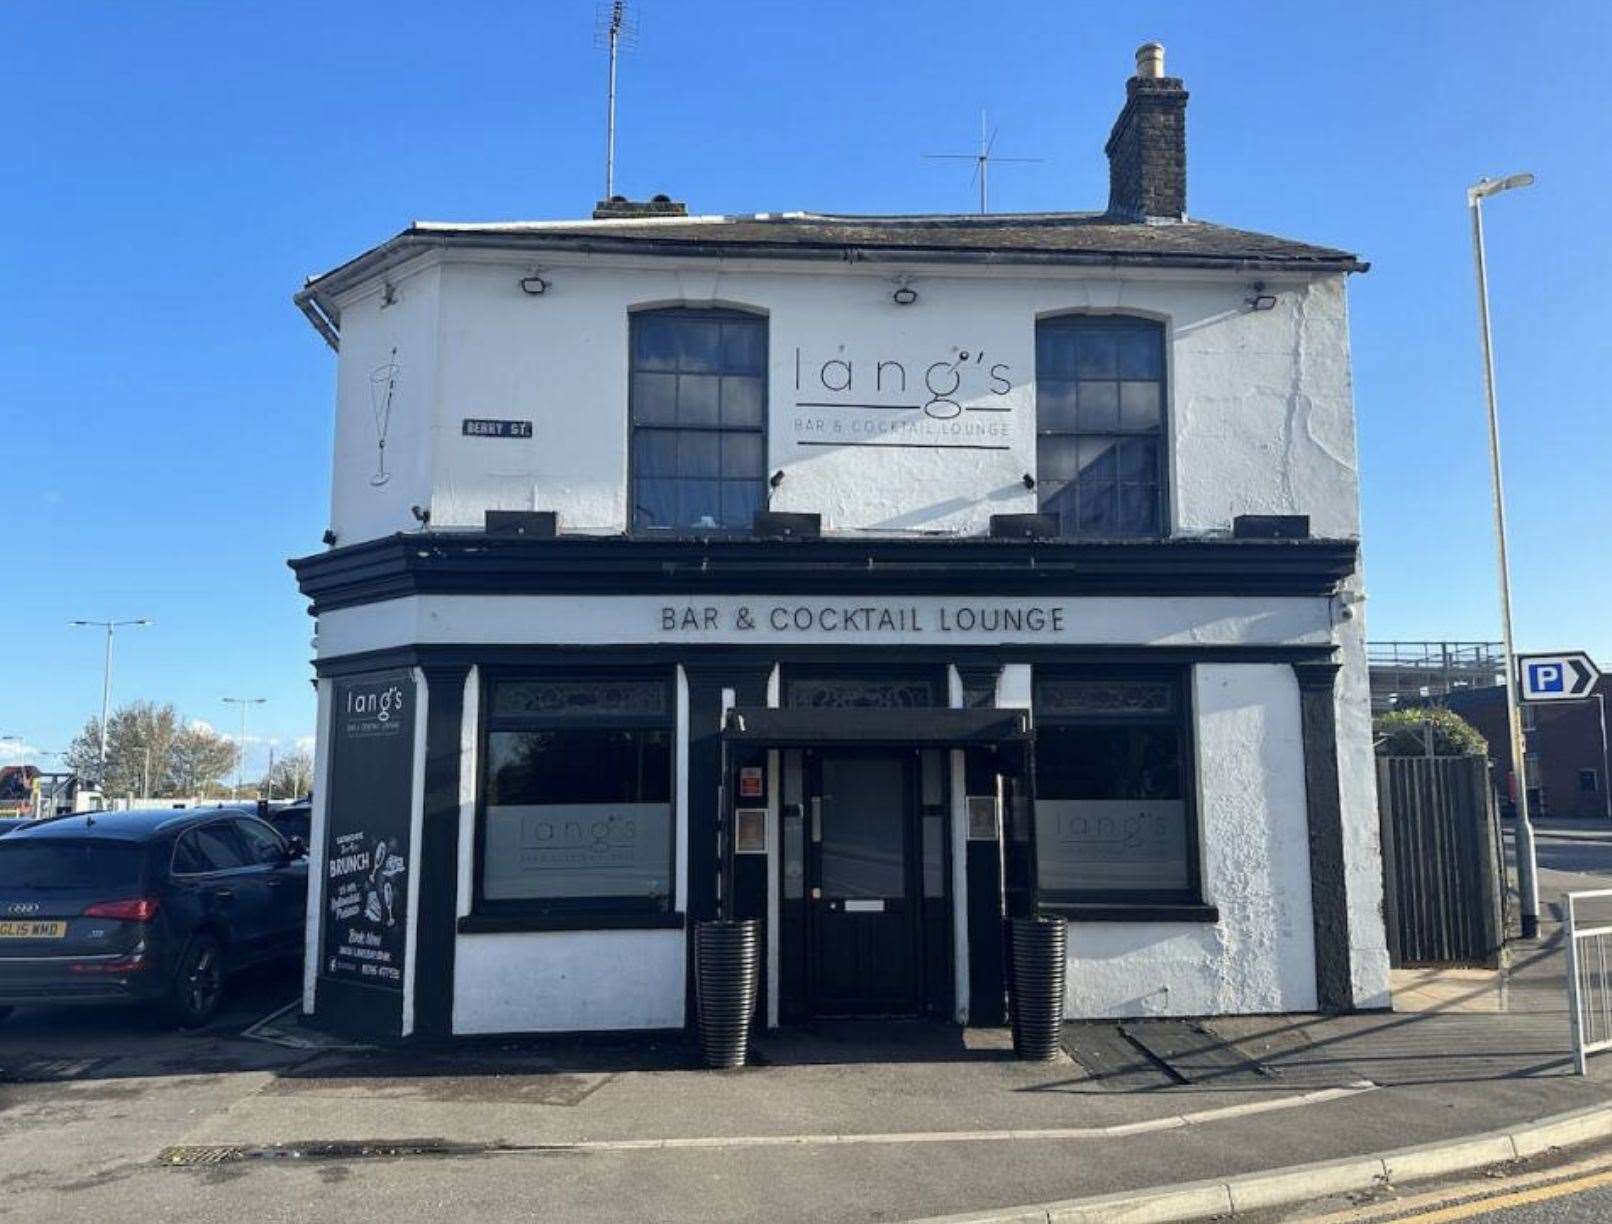 Lang's Bar and Cocktail Lounge in St Michael's Road, Sittingbourne. Pic: Rightmove/Savill's